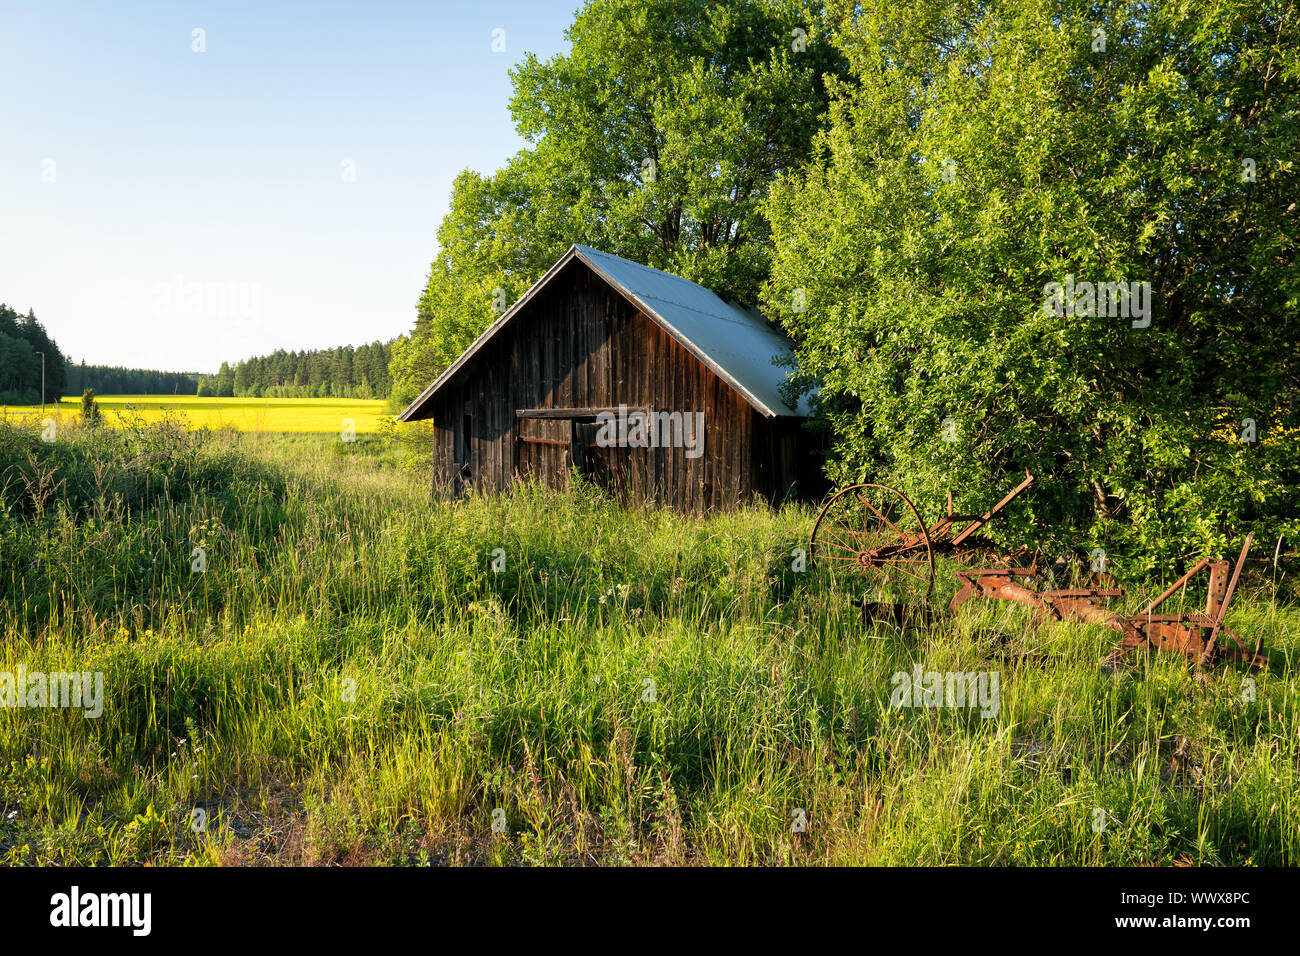 old Finnish wooden barn at Rusko, Finland. This taken in July 2017 Photo - Alamy